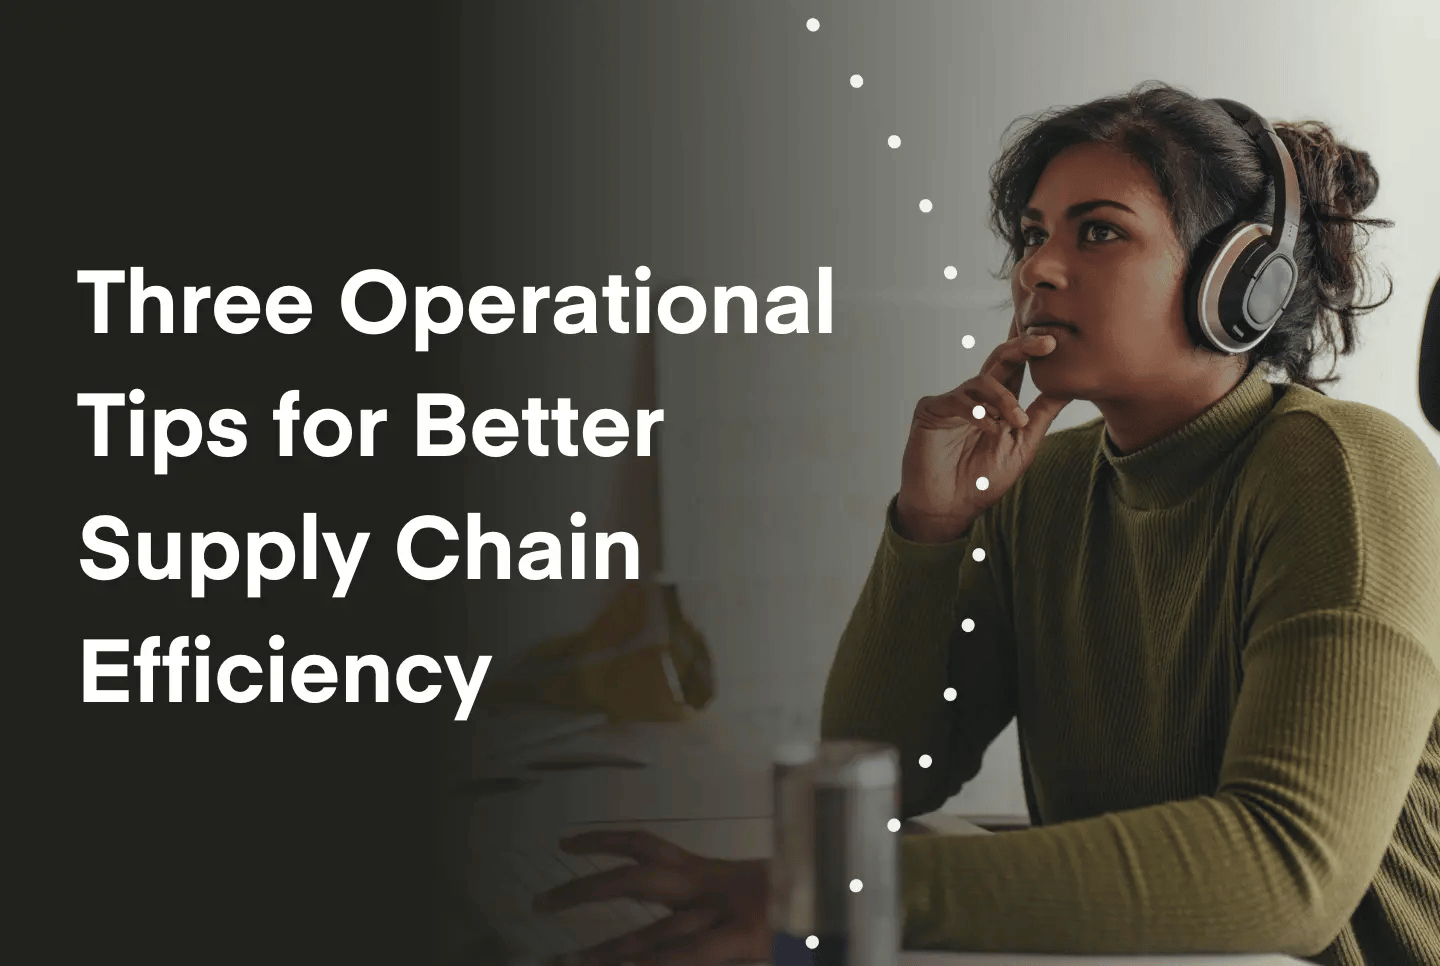 Photo of a supply chain professional with text "Three operational tips for better supply chain efficiency"